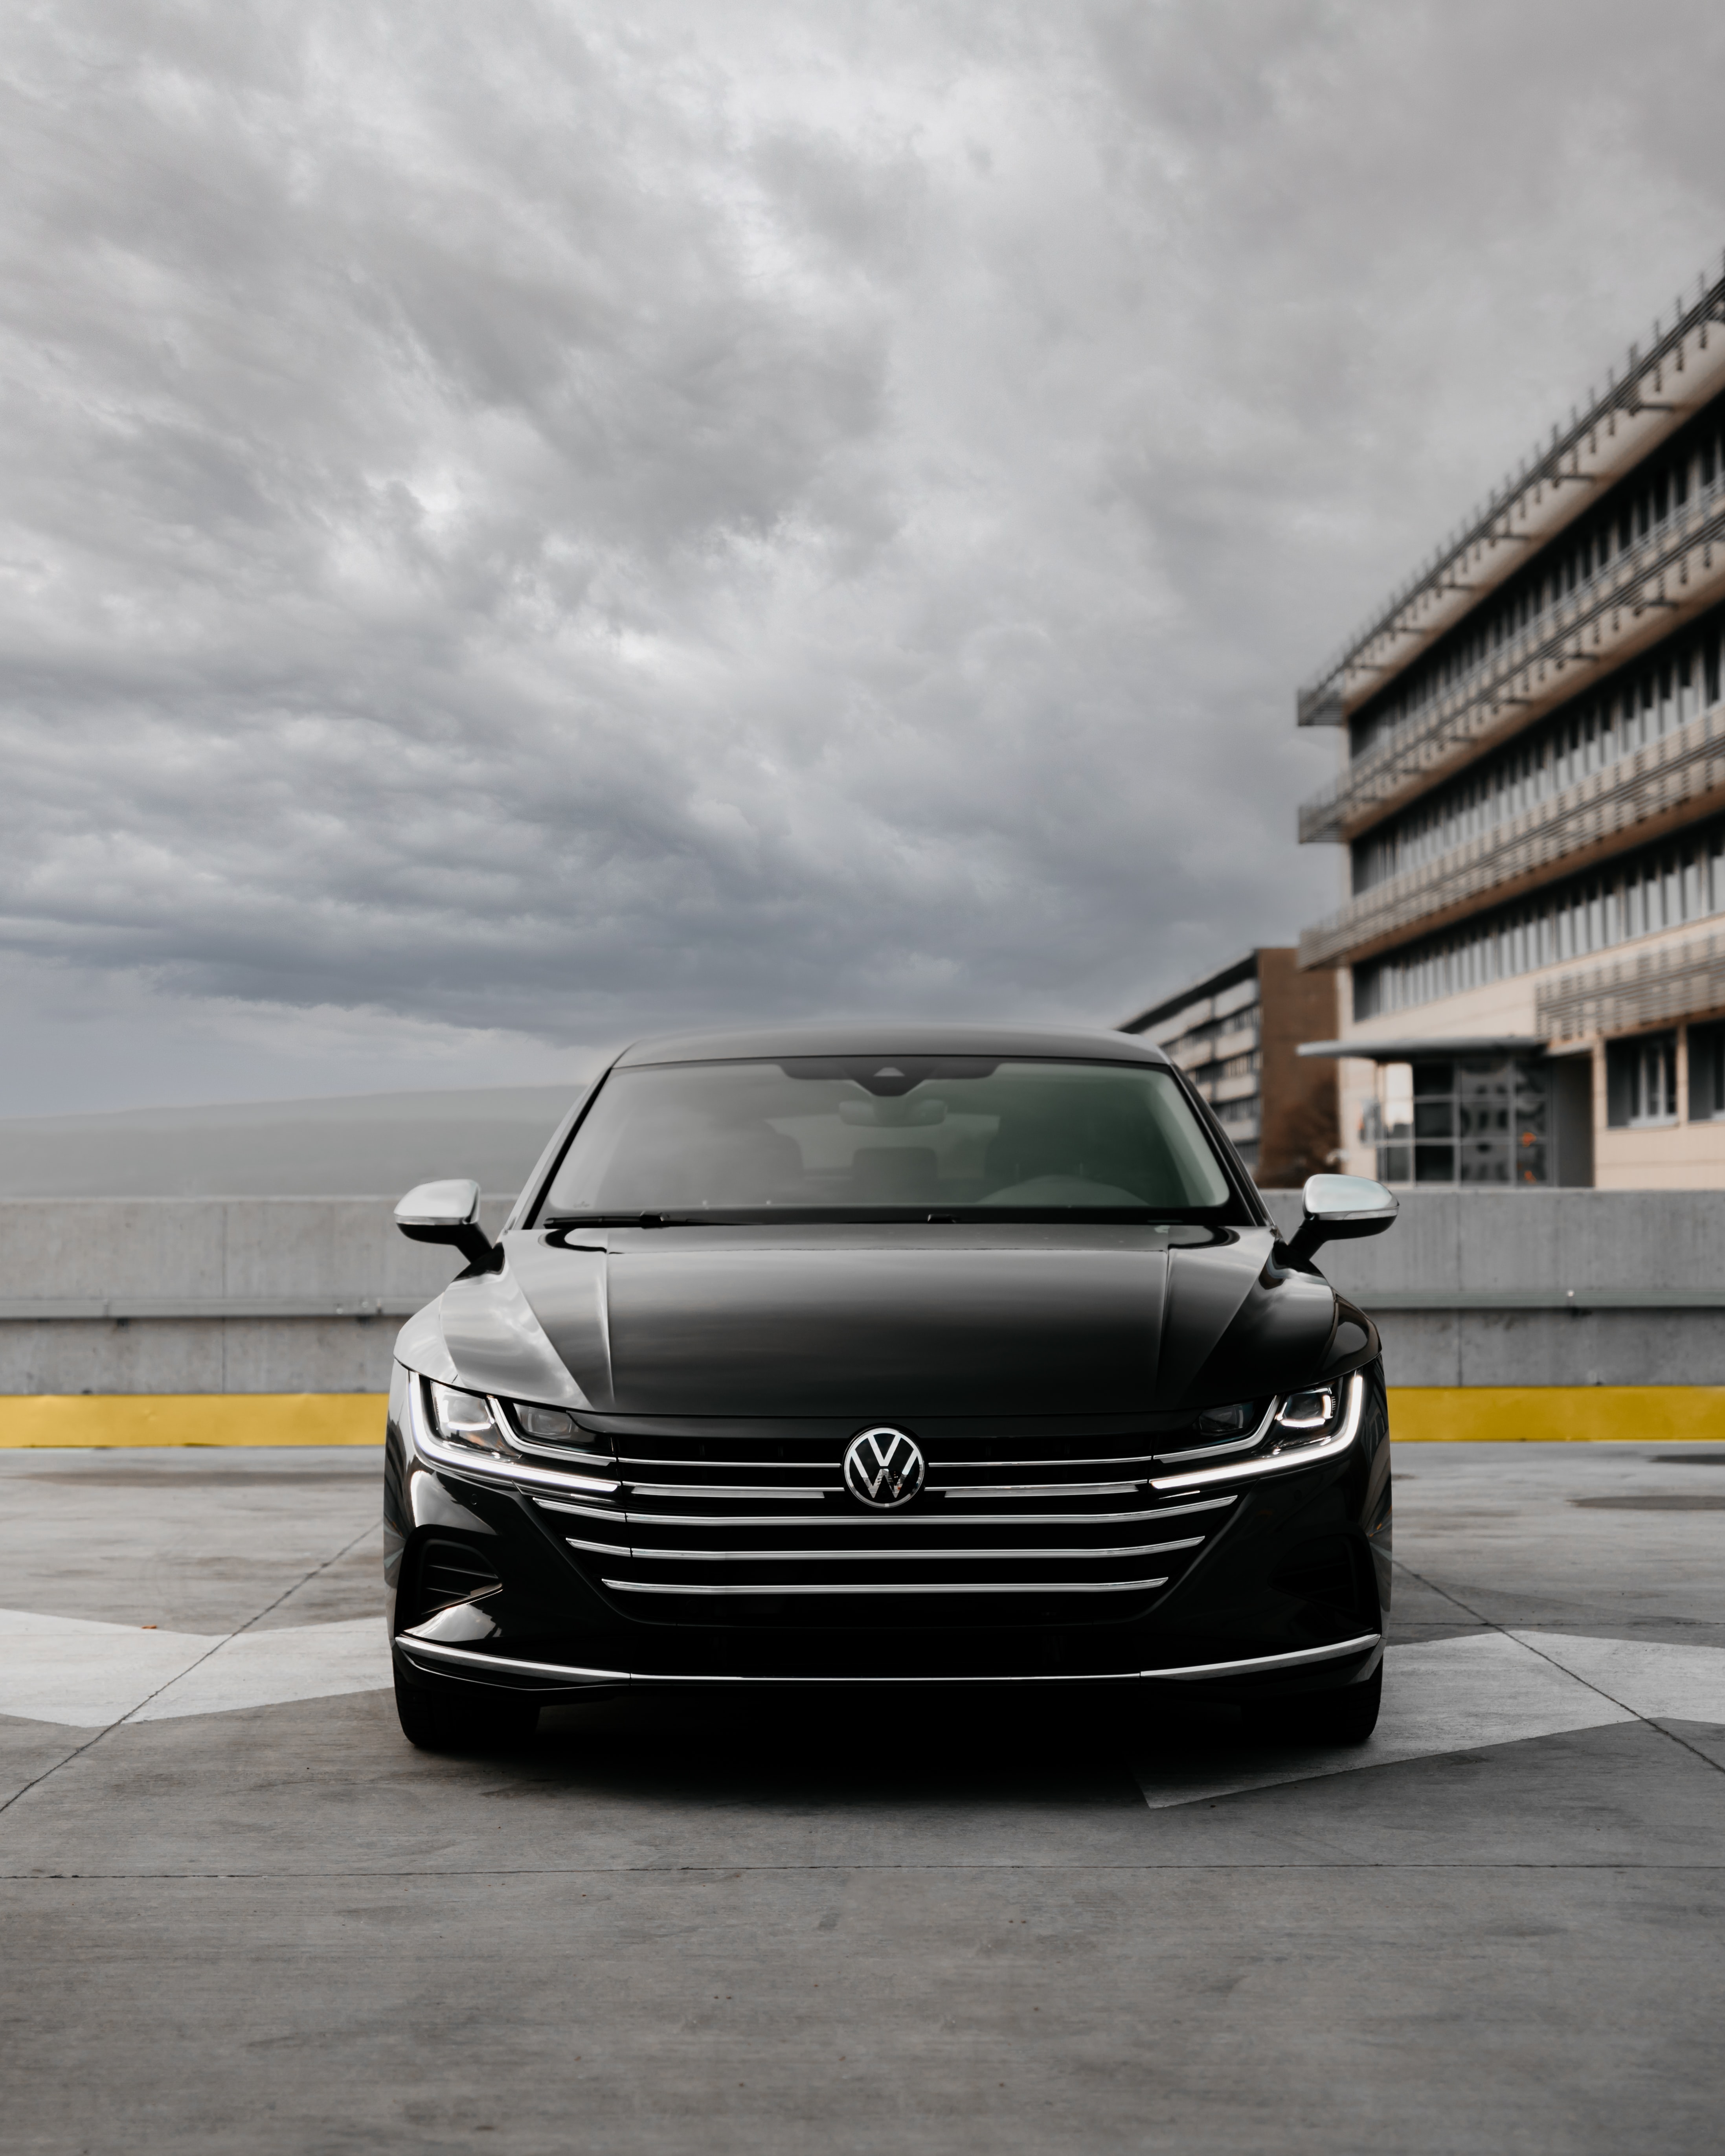 volkswagen, front view, cars, black, car Full HD